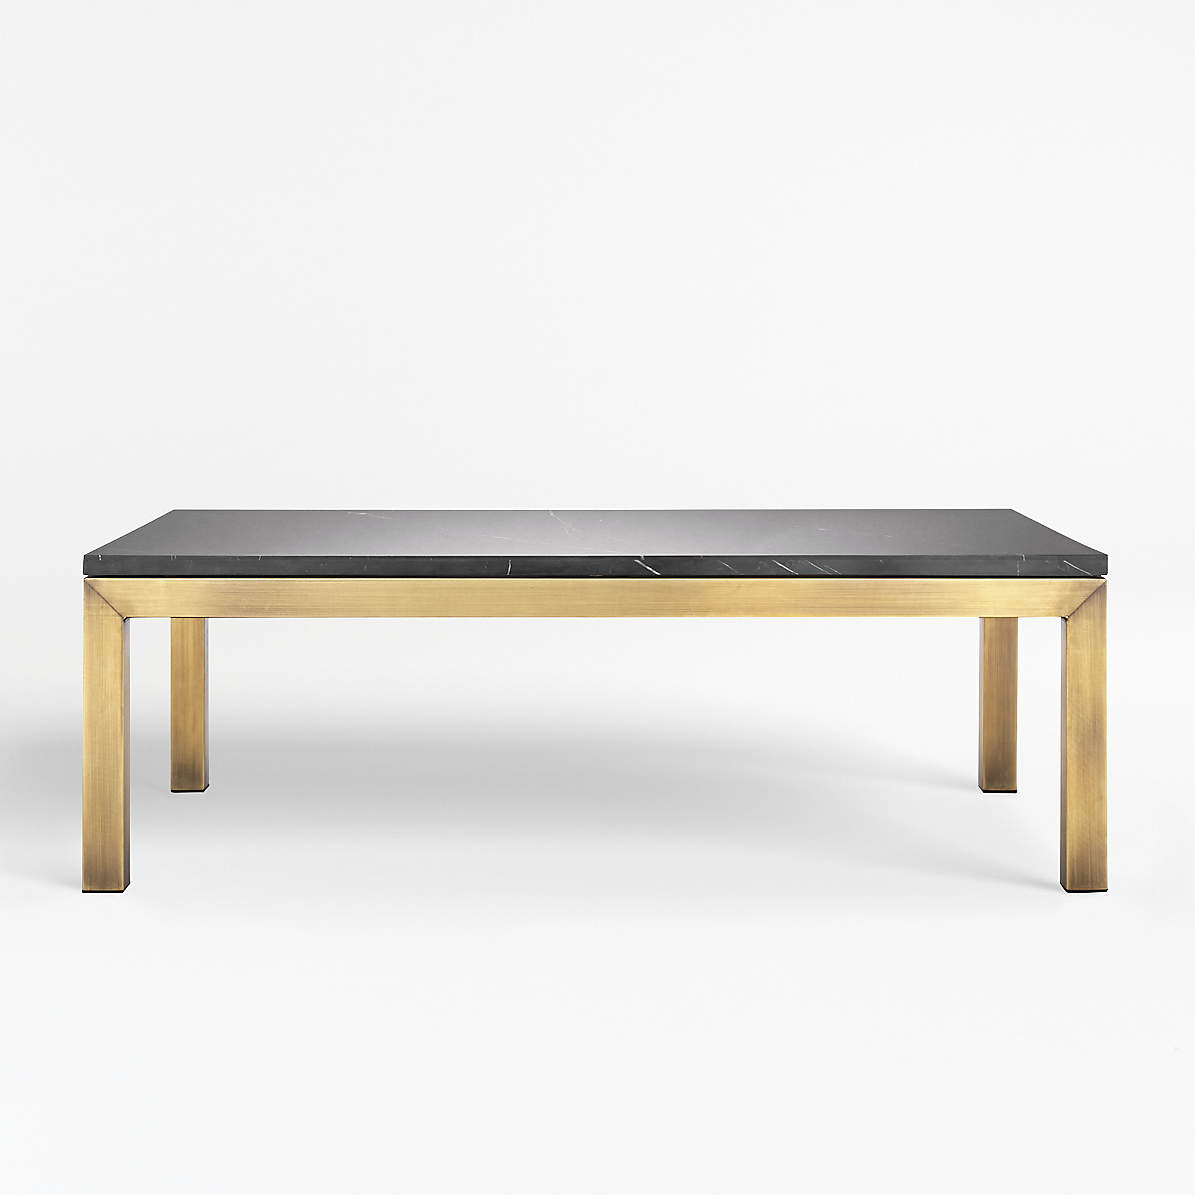 Featured image of post Small Dark Wood Coffee Table - All products from small dark wood coffee tables category are shipped worldwide with no additional fees.